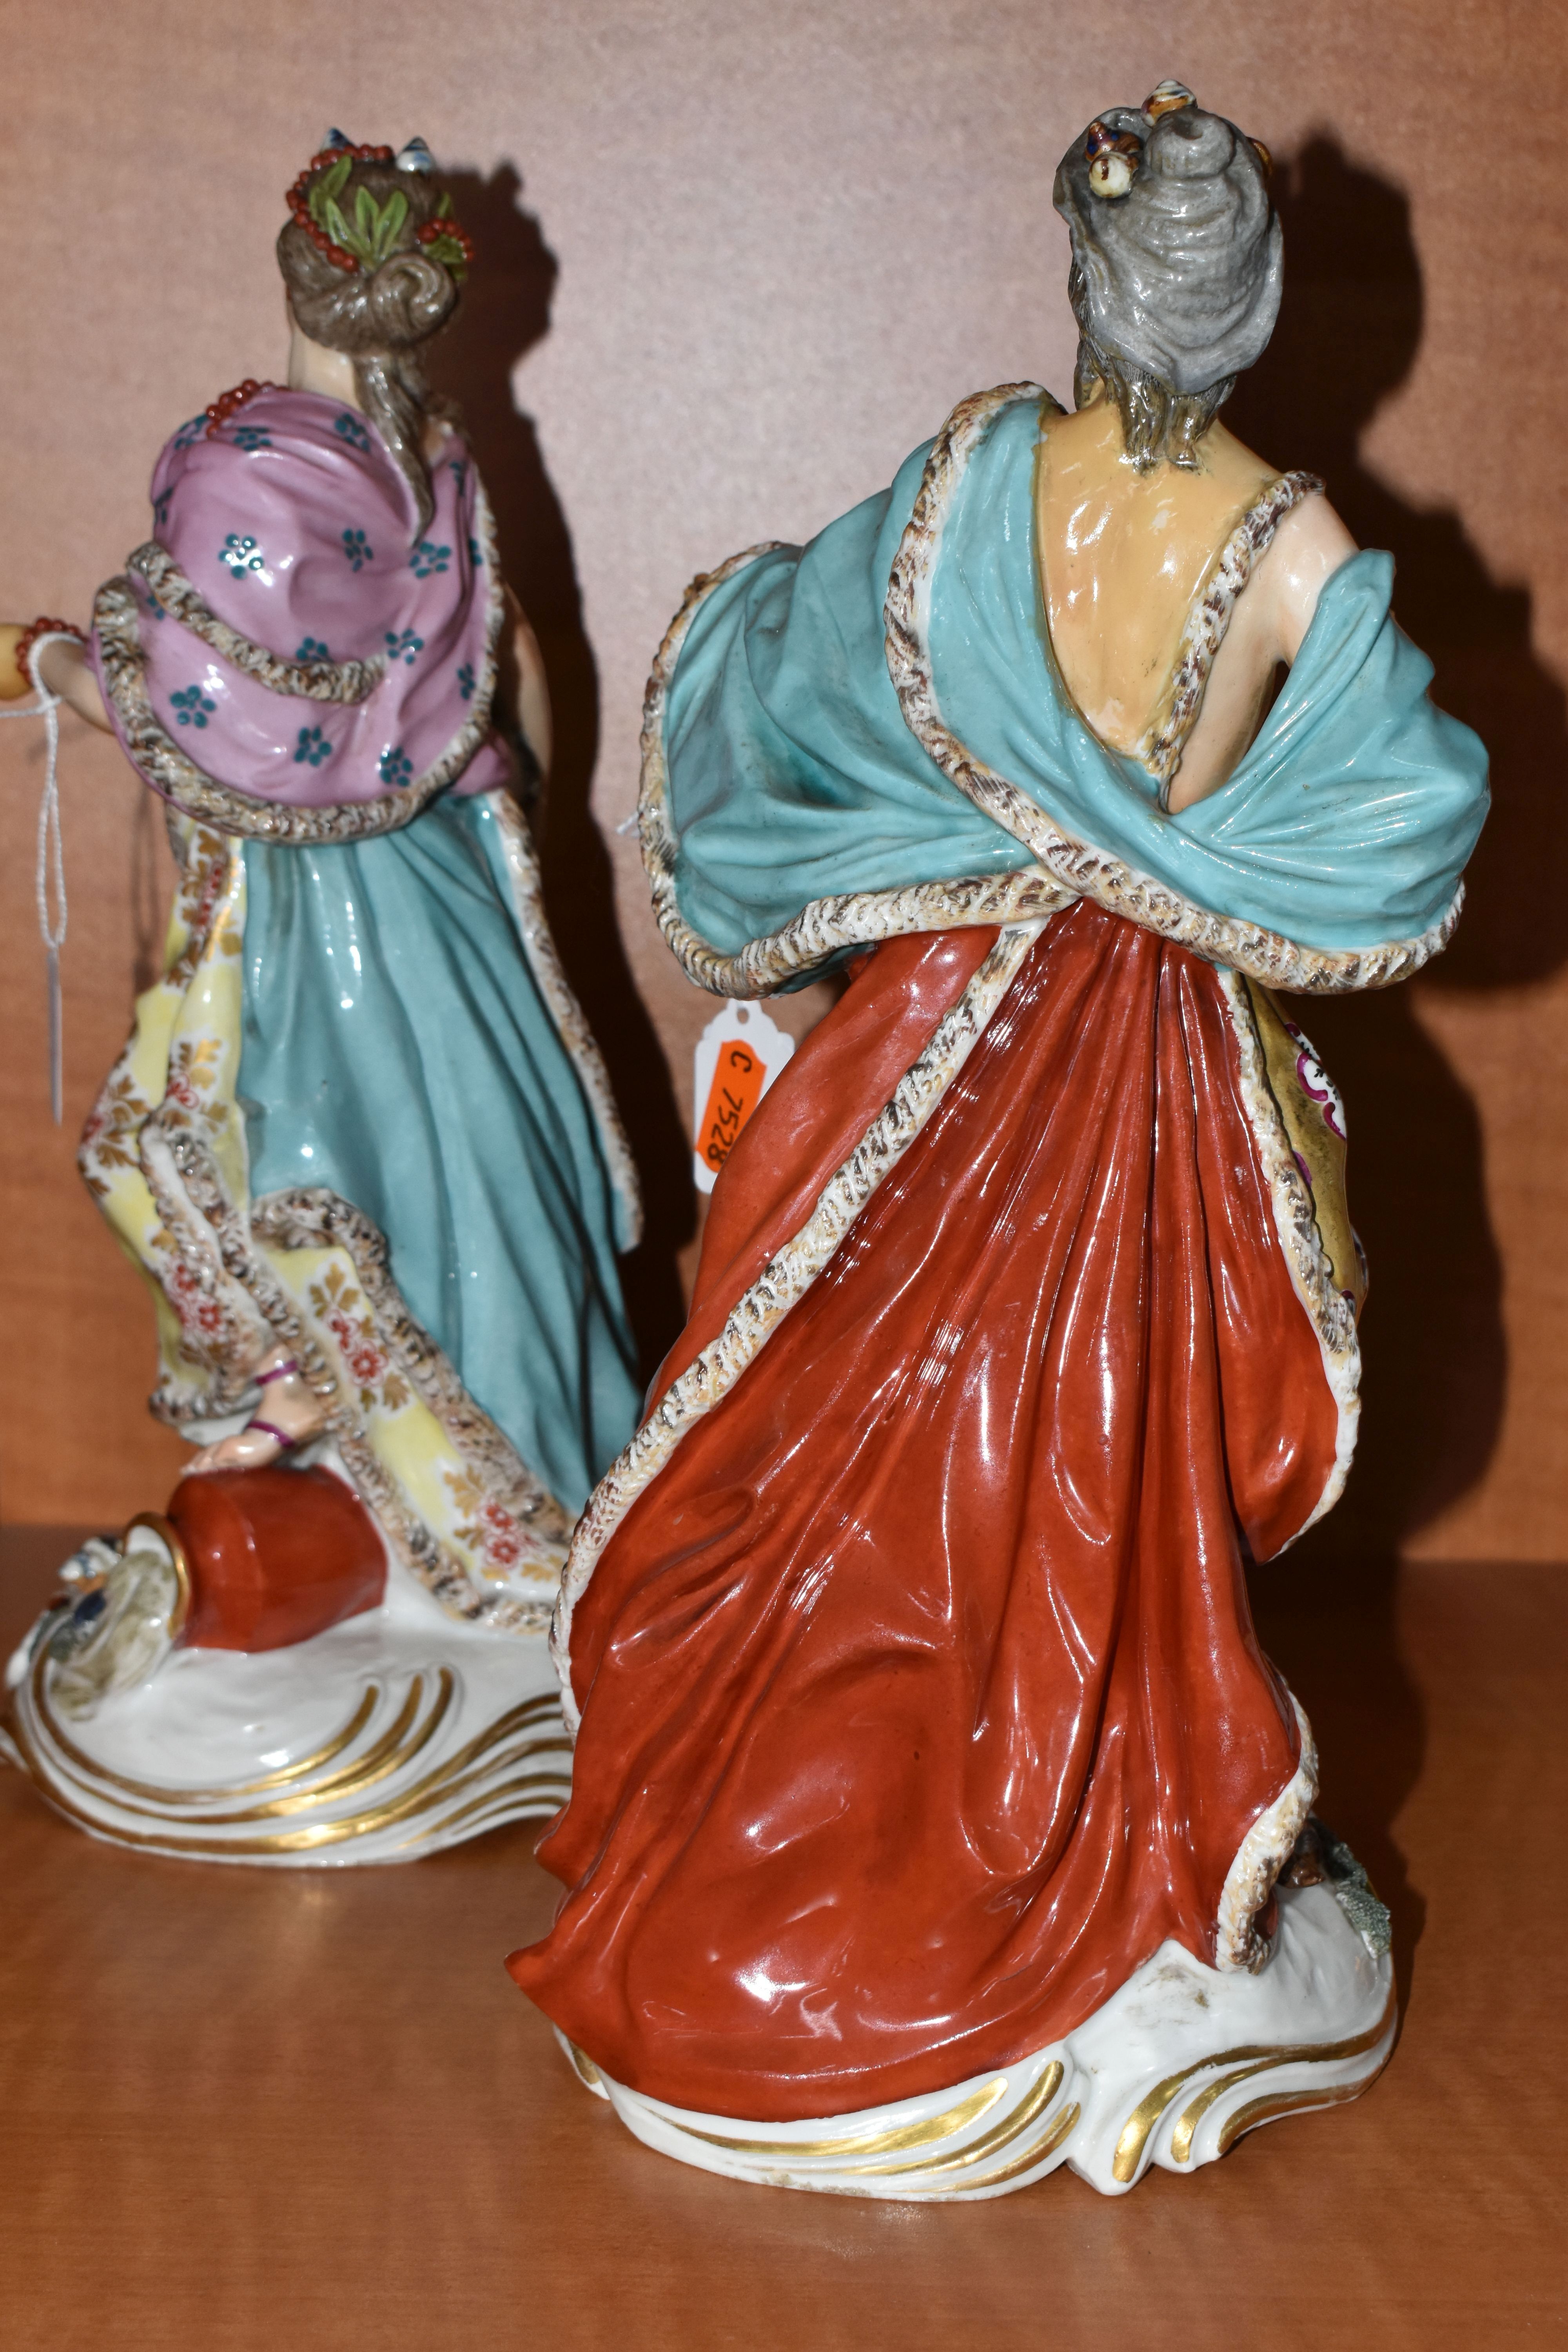 A PAIR OF 19TH CENTURY CONTINENTAL PORCELAIN FIGURES OF POSEIDEN AND AMPHITRITE, both modelled as - Image 6 of 10